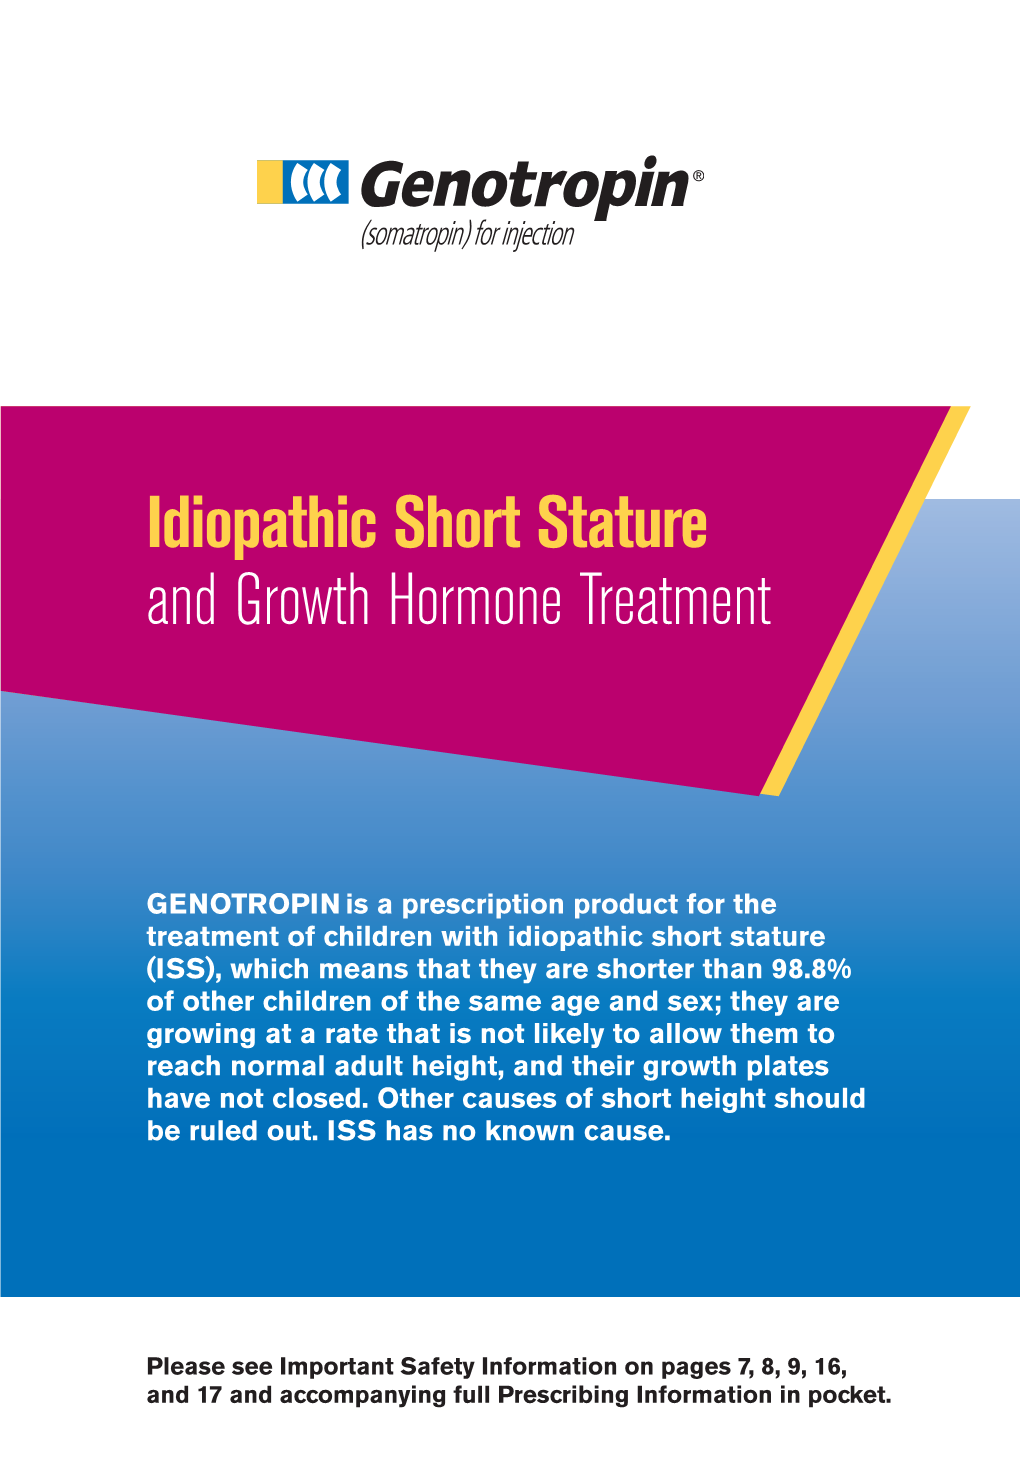 Idiopathic Short Stature and Growth Hormone Treatment